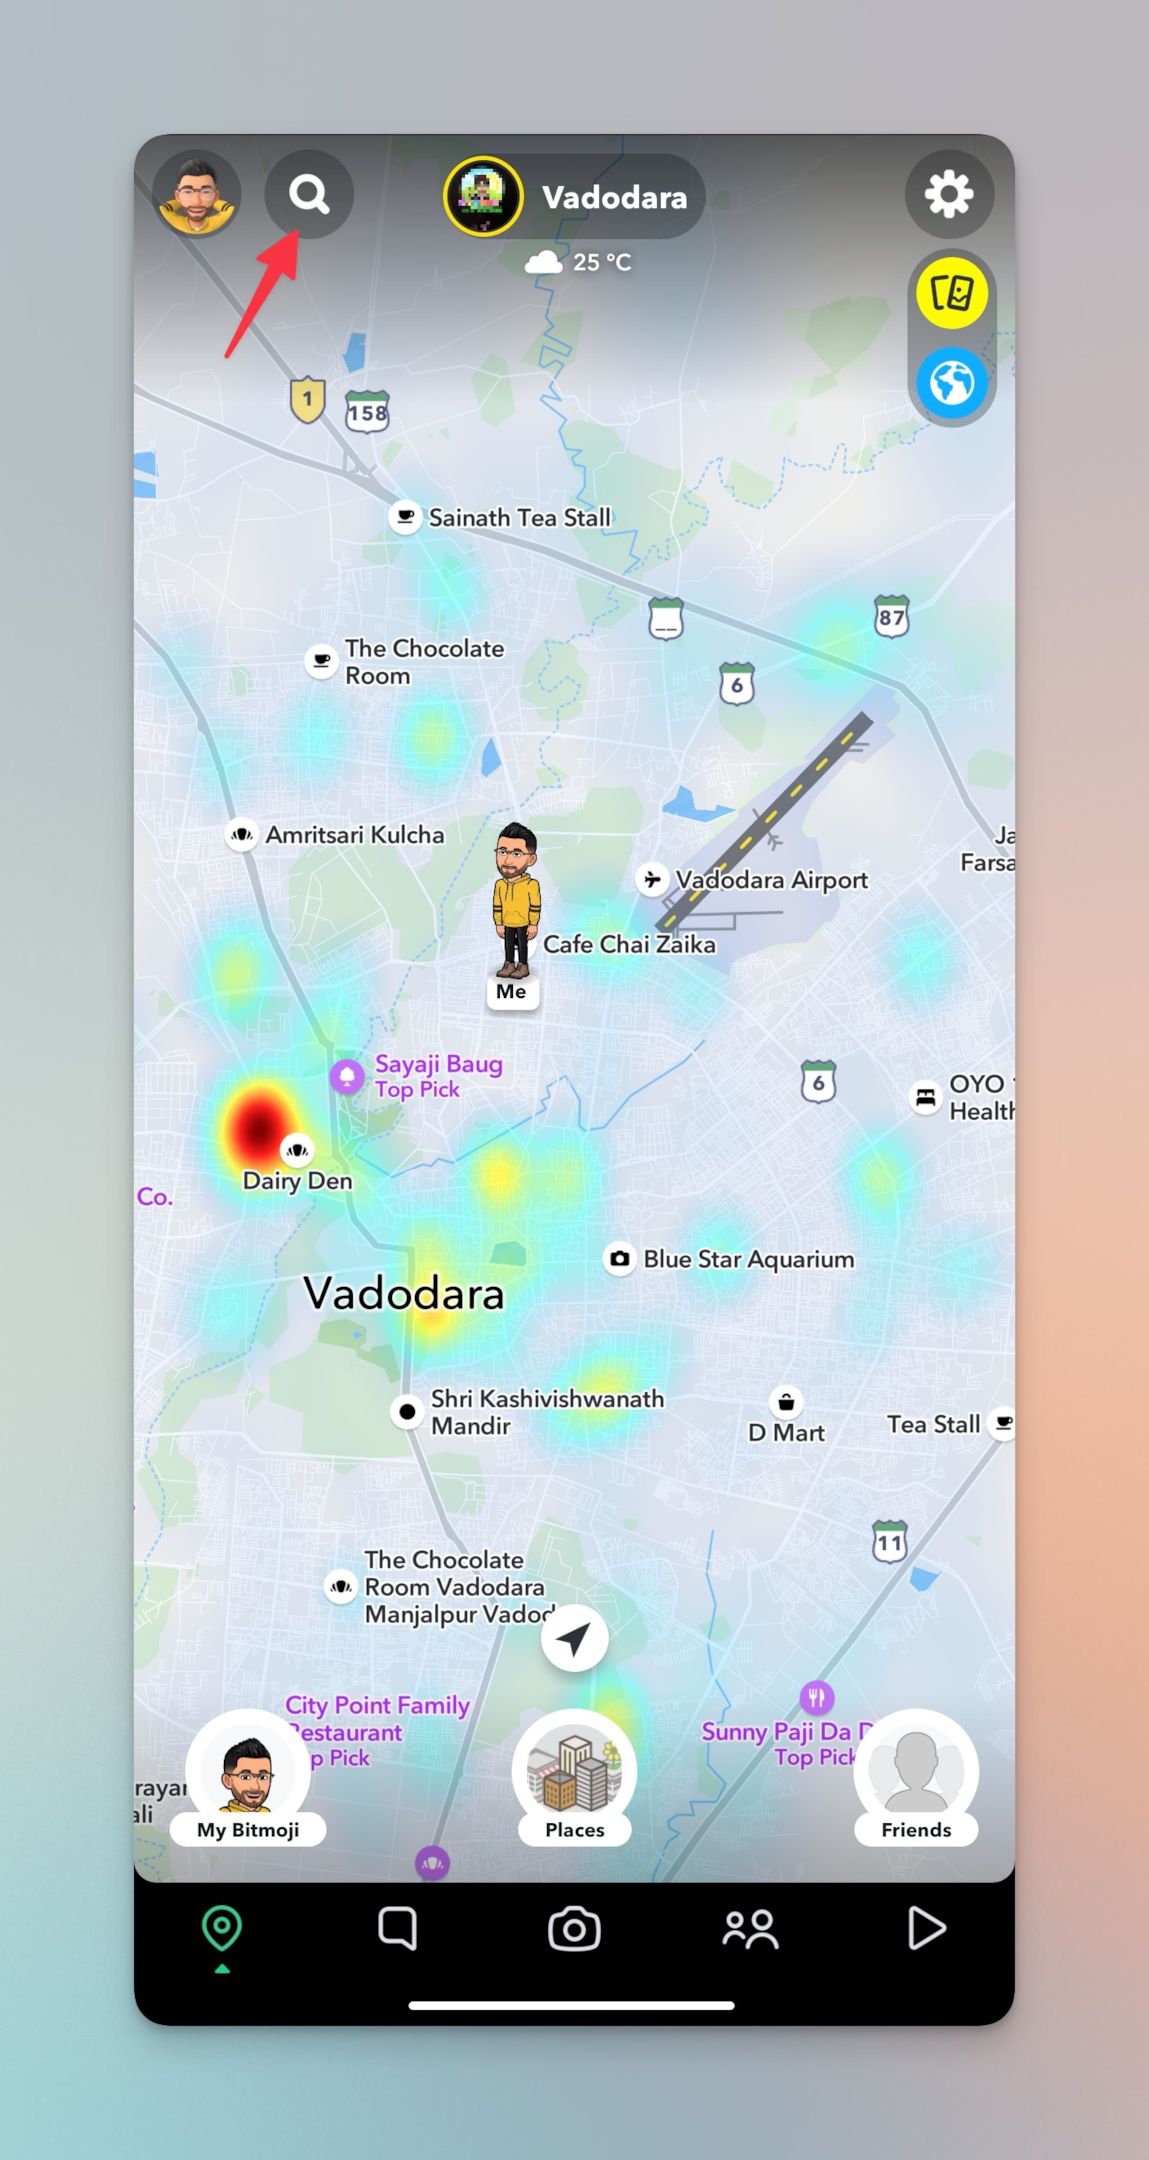 Remote.tools showing the Snapchat's snap map feature. By turning on the ghost mode, you can completely bypass the location access and sneak around on the map.